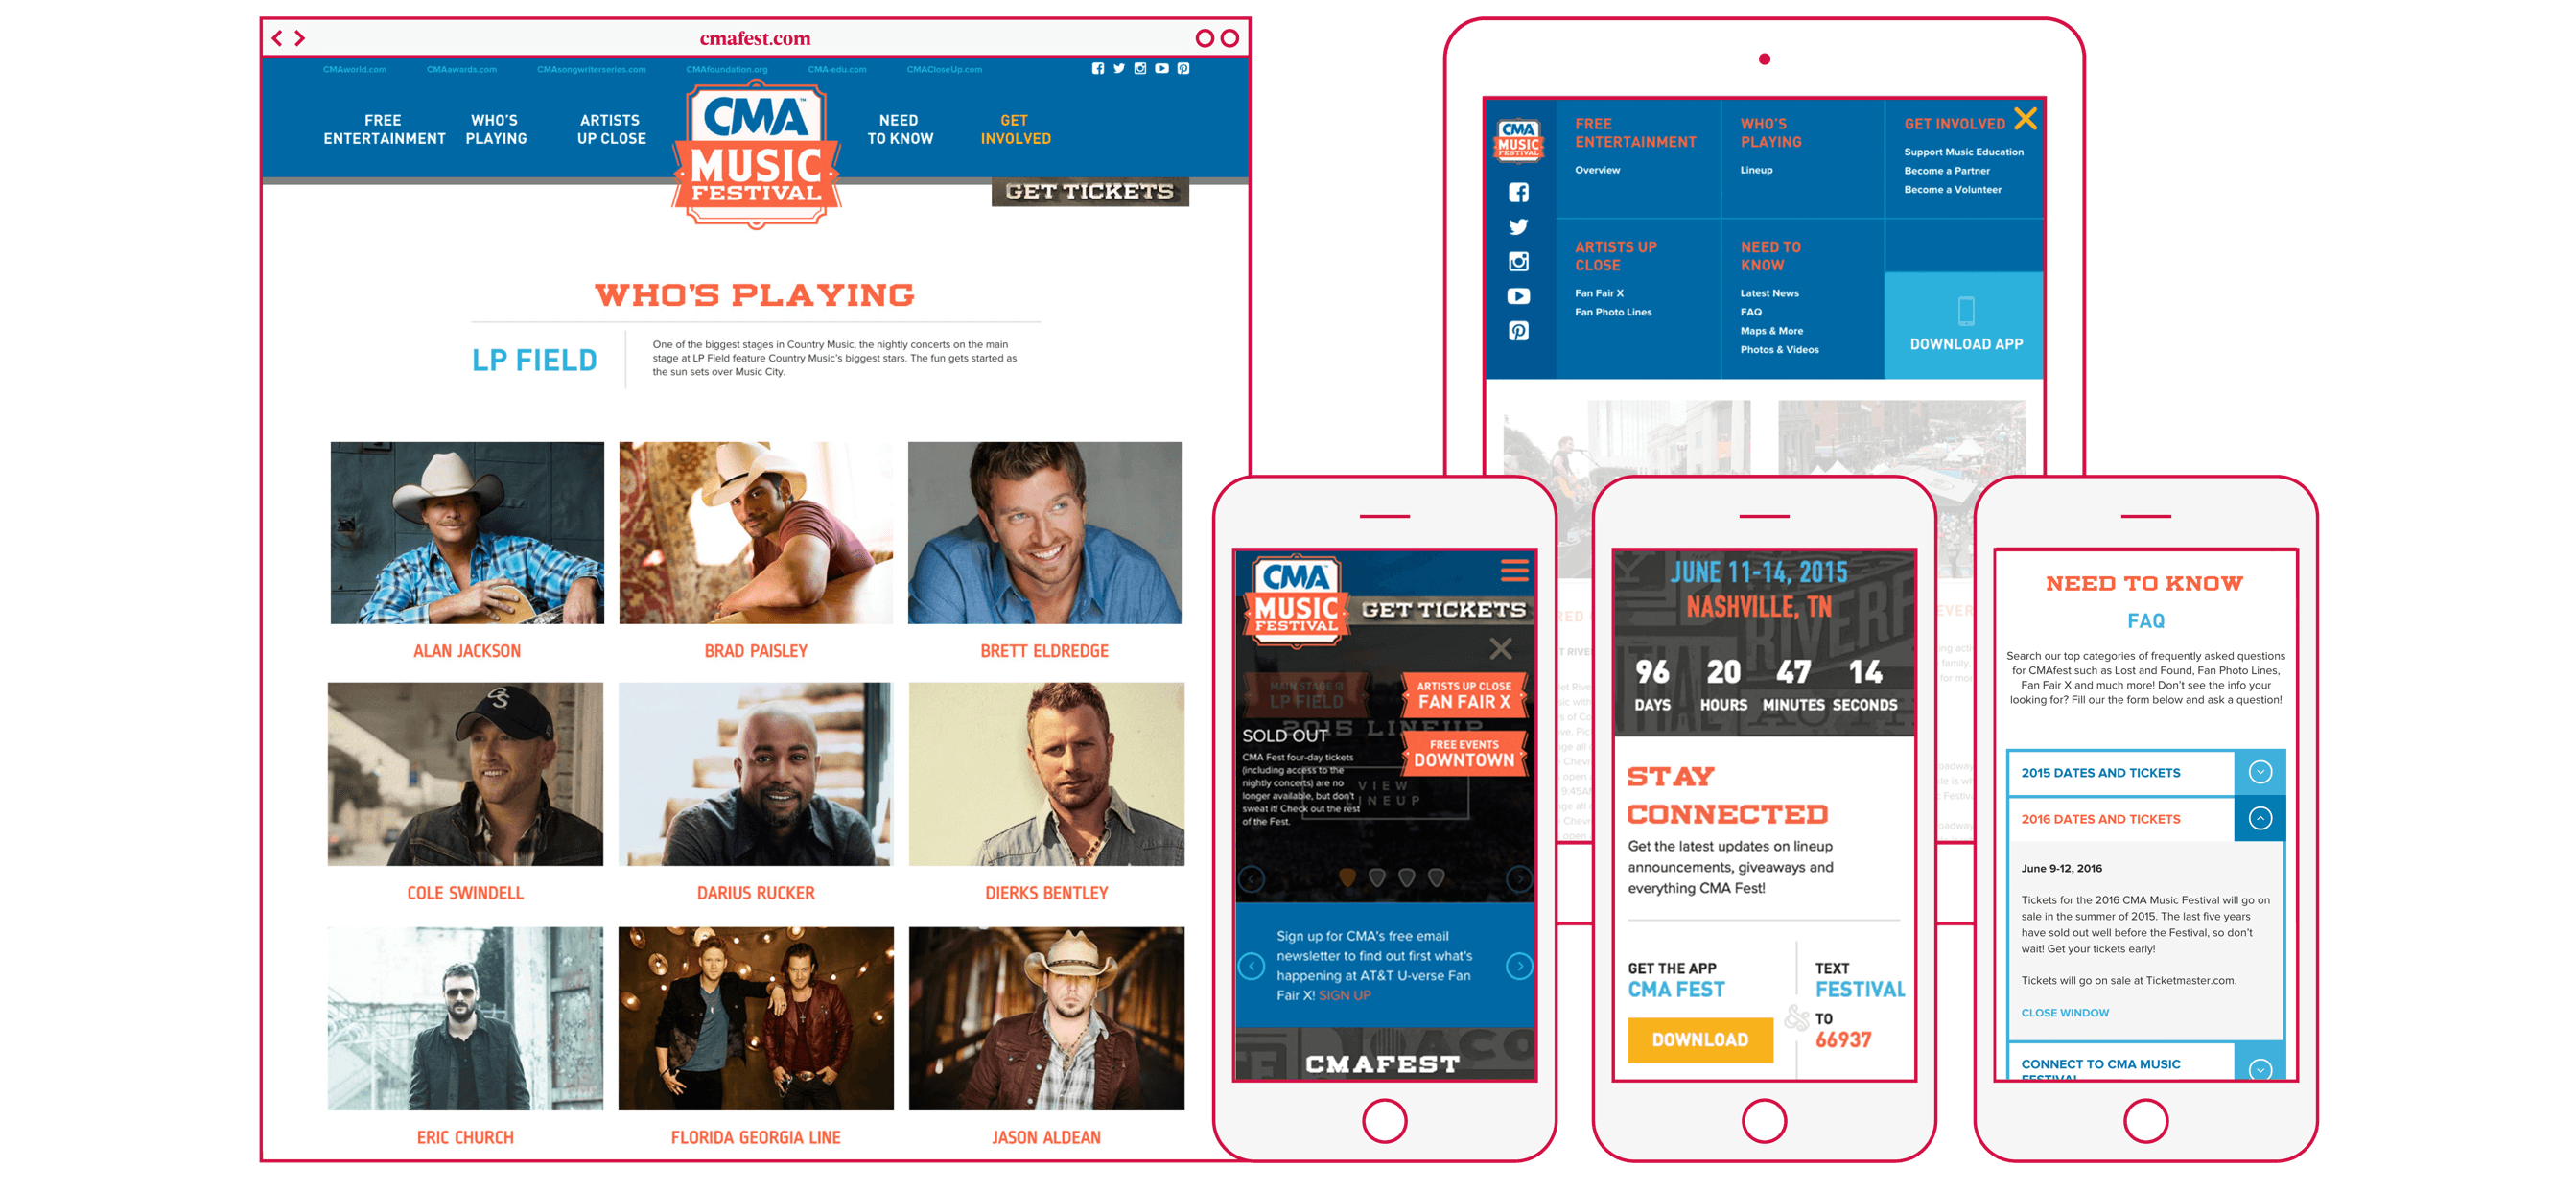 CMA Music Festival website pages shown in a browser window and mobile devices for cmafest.com